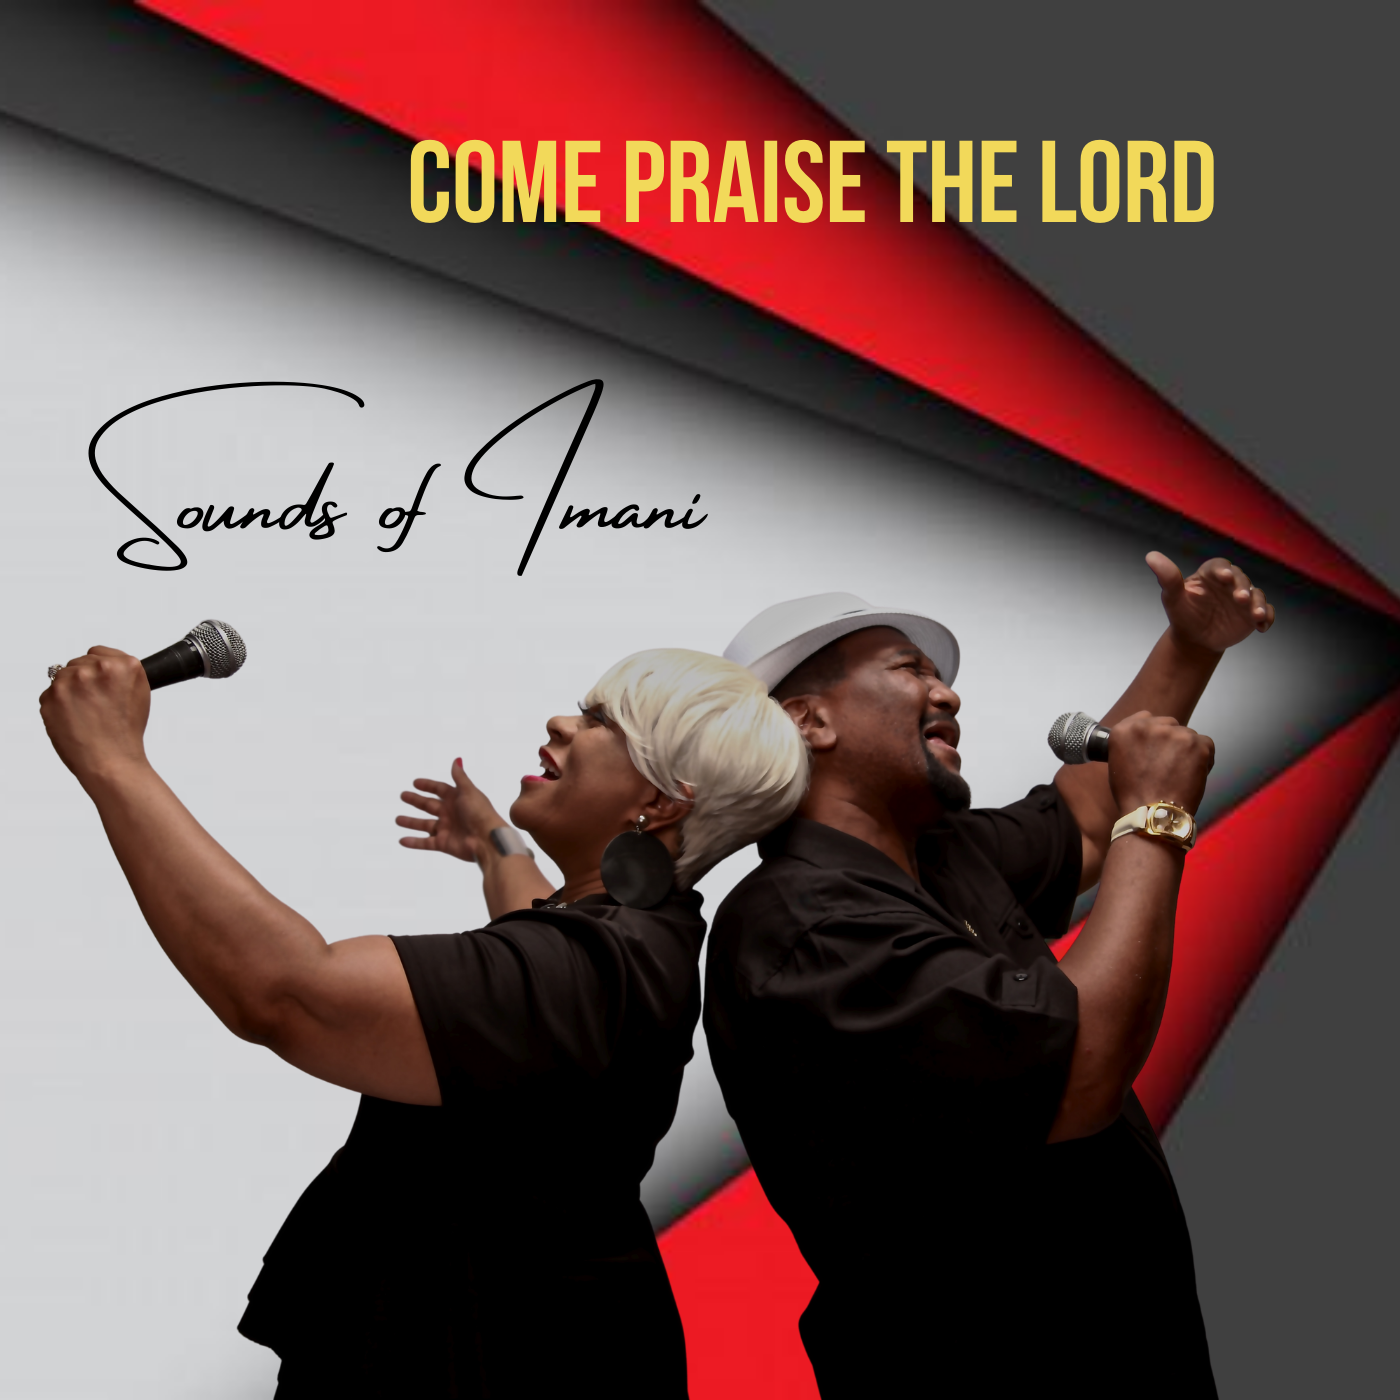 Art for COME PRAISE THE LORD by Sounds of Imani